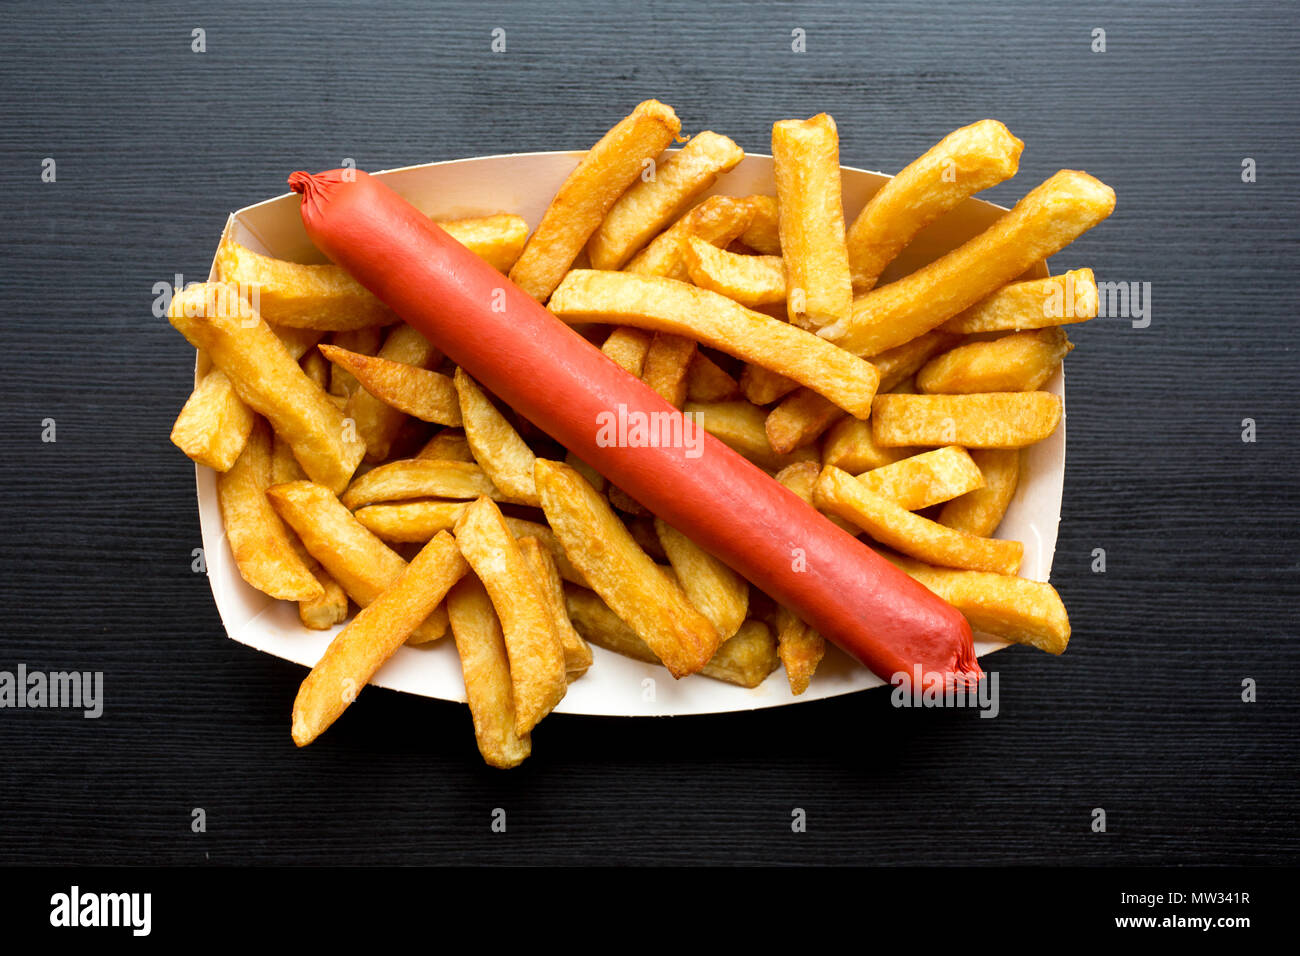 Sausage and chips Stock Photo